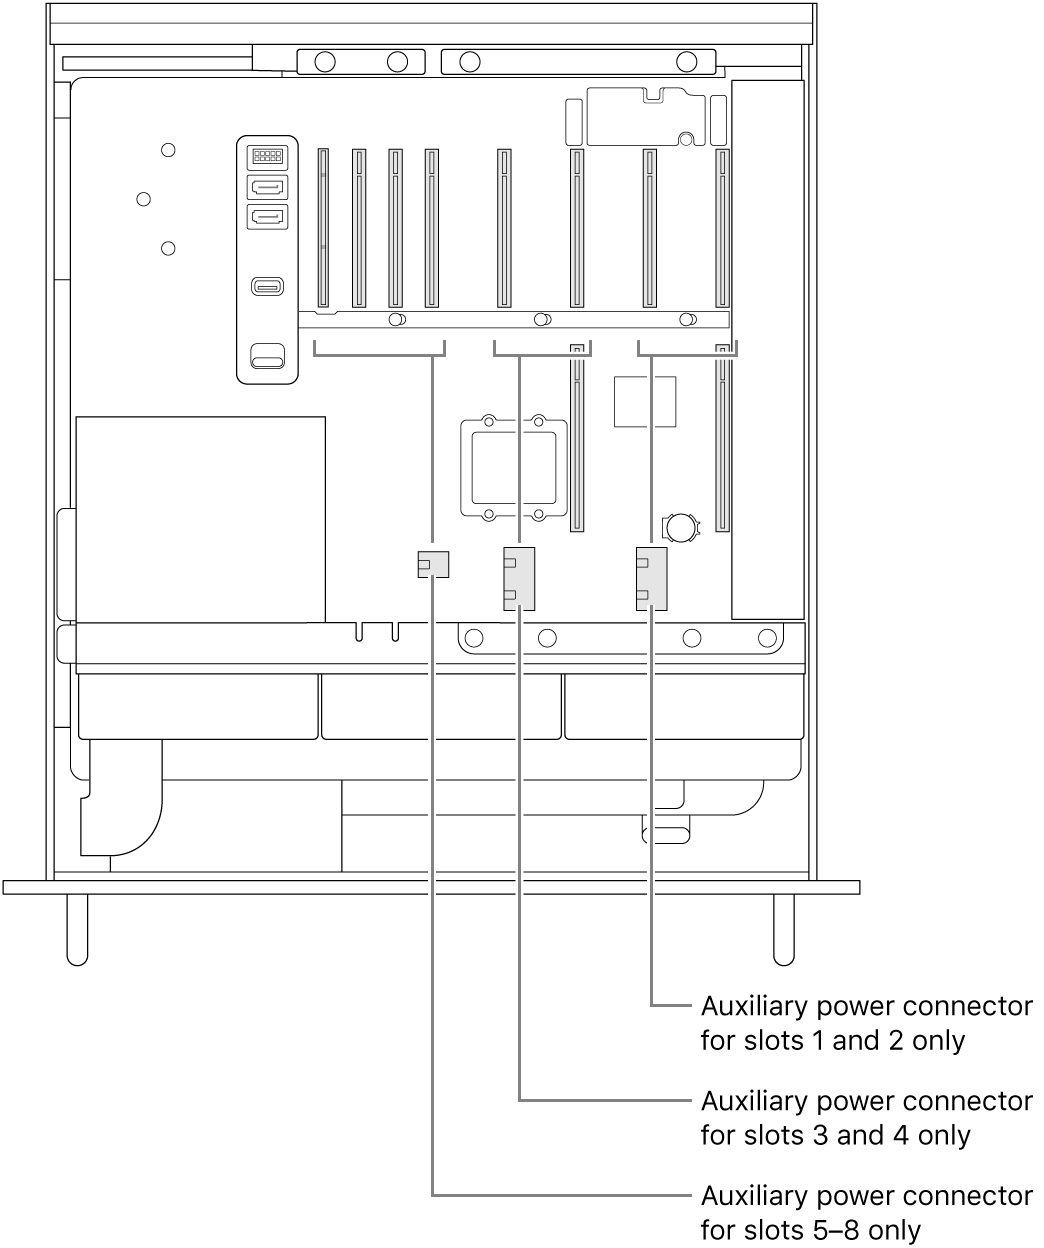 The side of Mac Pro open with callouts showing which slots are related to which auxiliary power connectors.